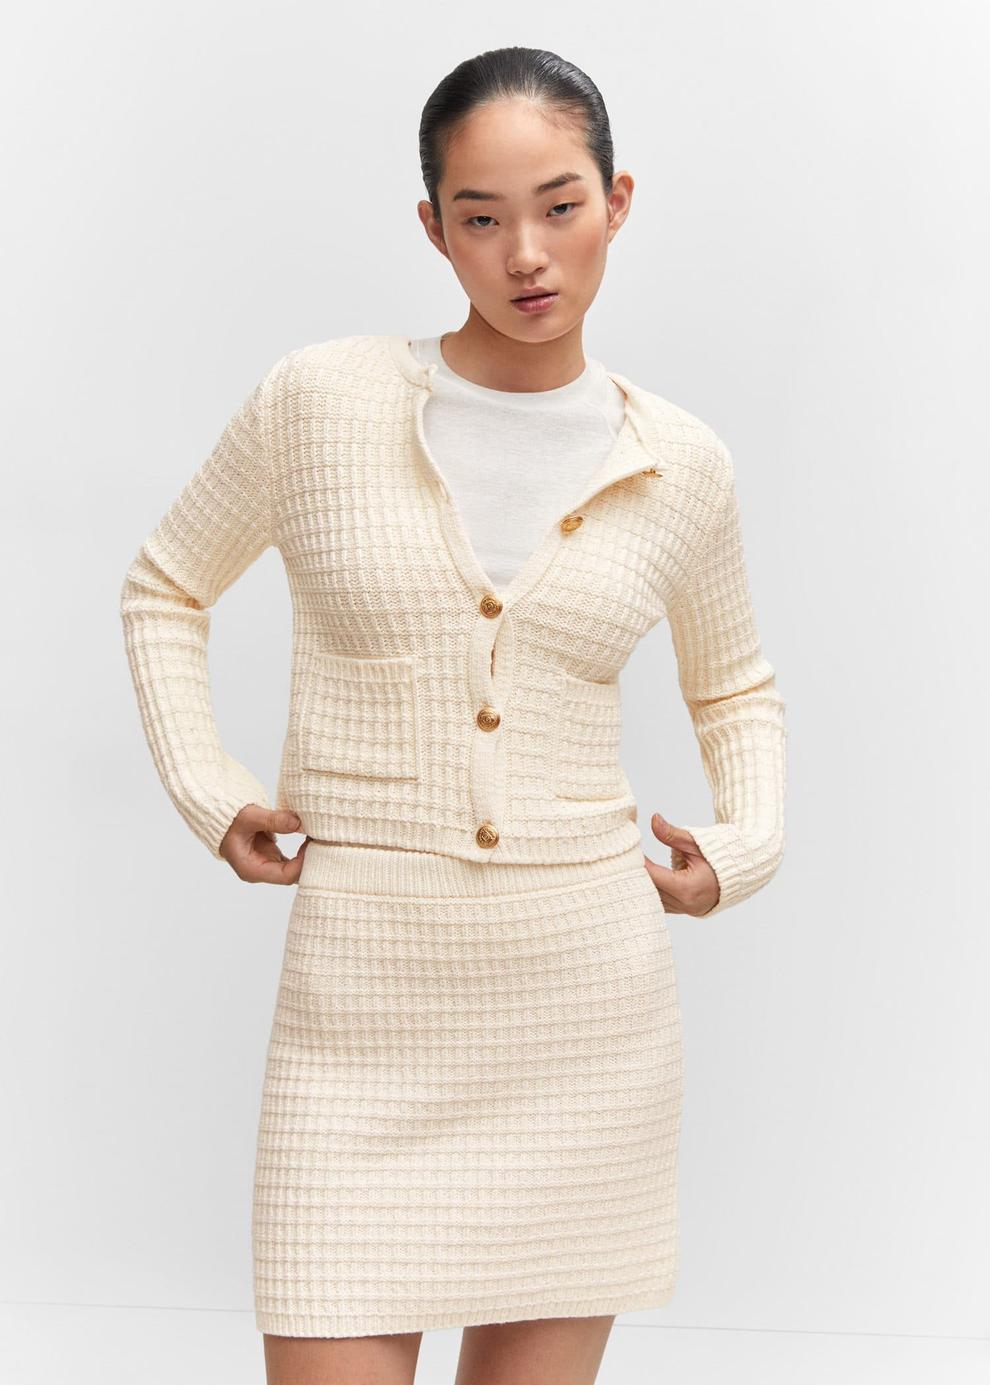 Textured knit cardigan offers at R 899 in Mango